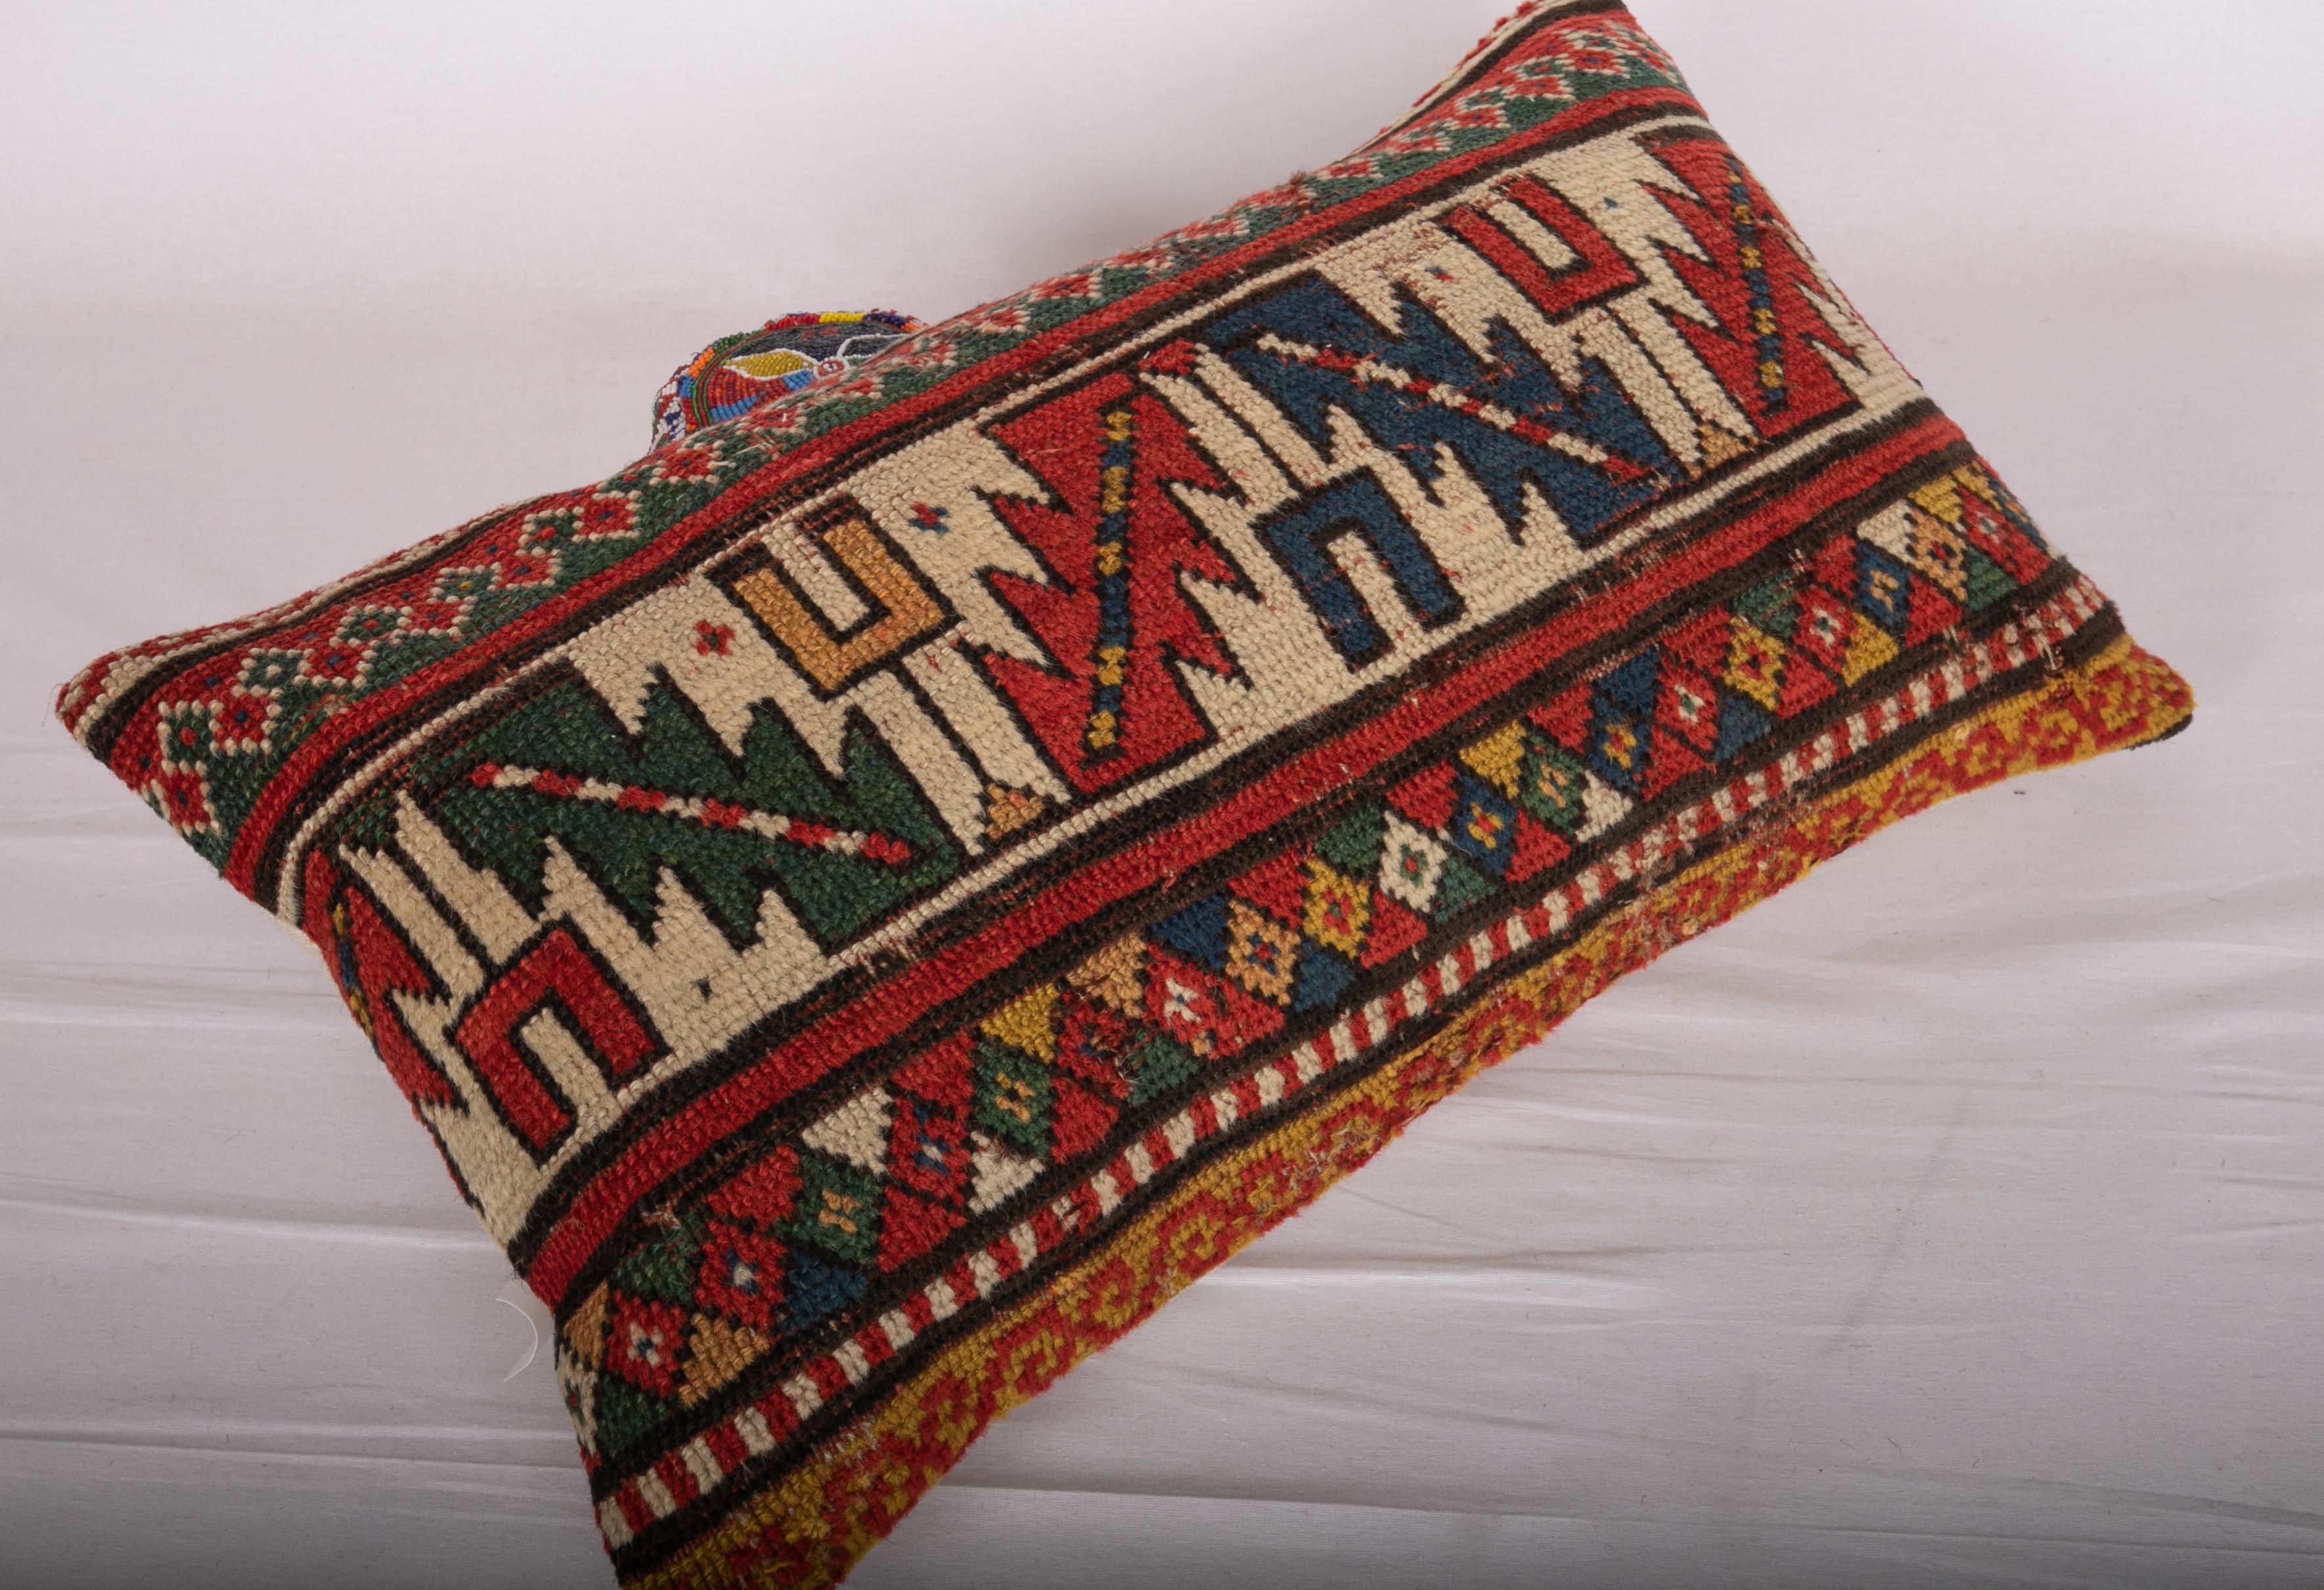 Hand-Woven Antique Rug Pillow Case Made from a 19th Century Caucasian Rug